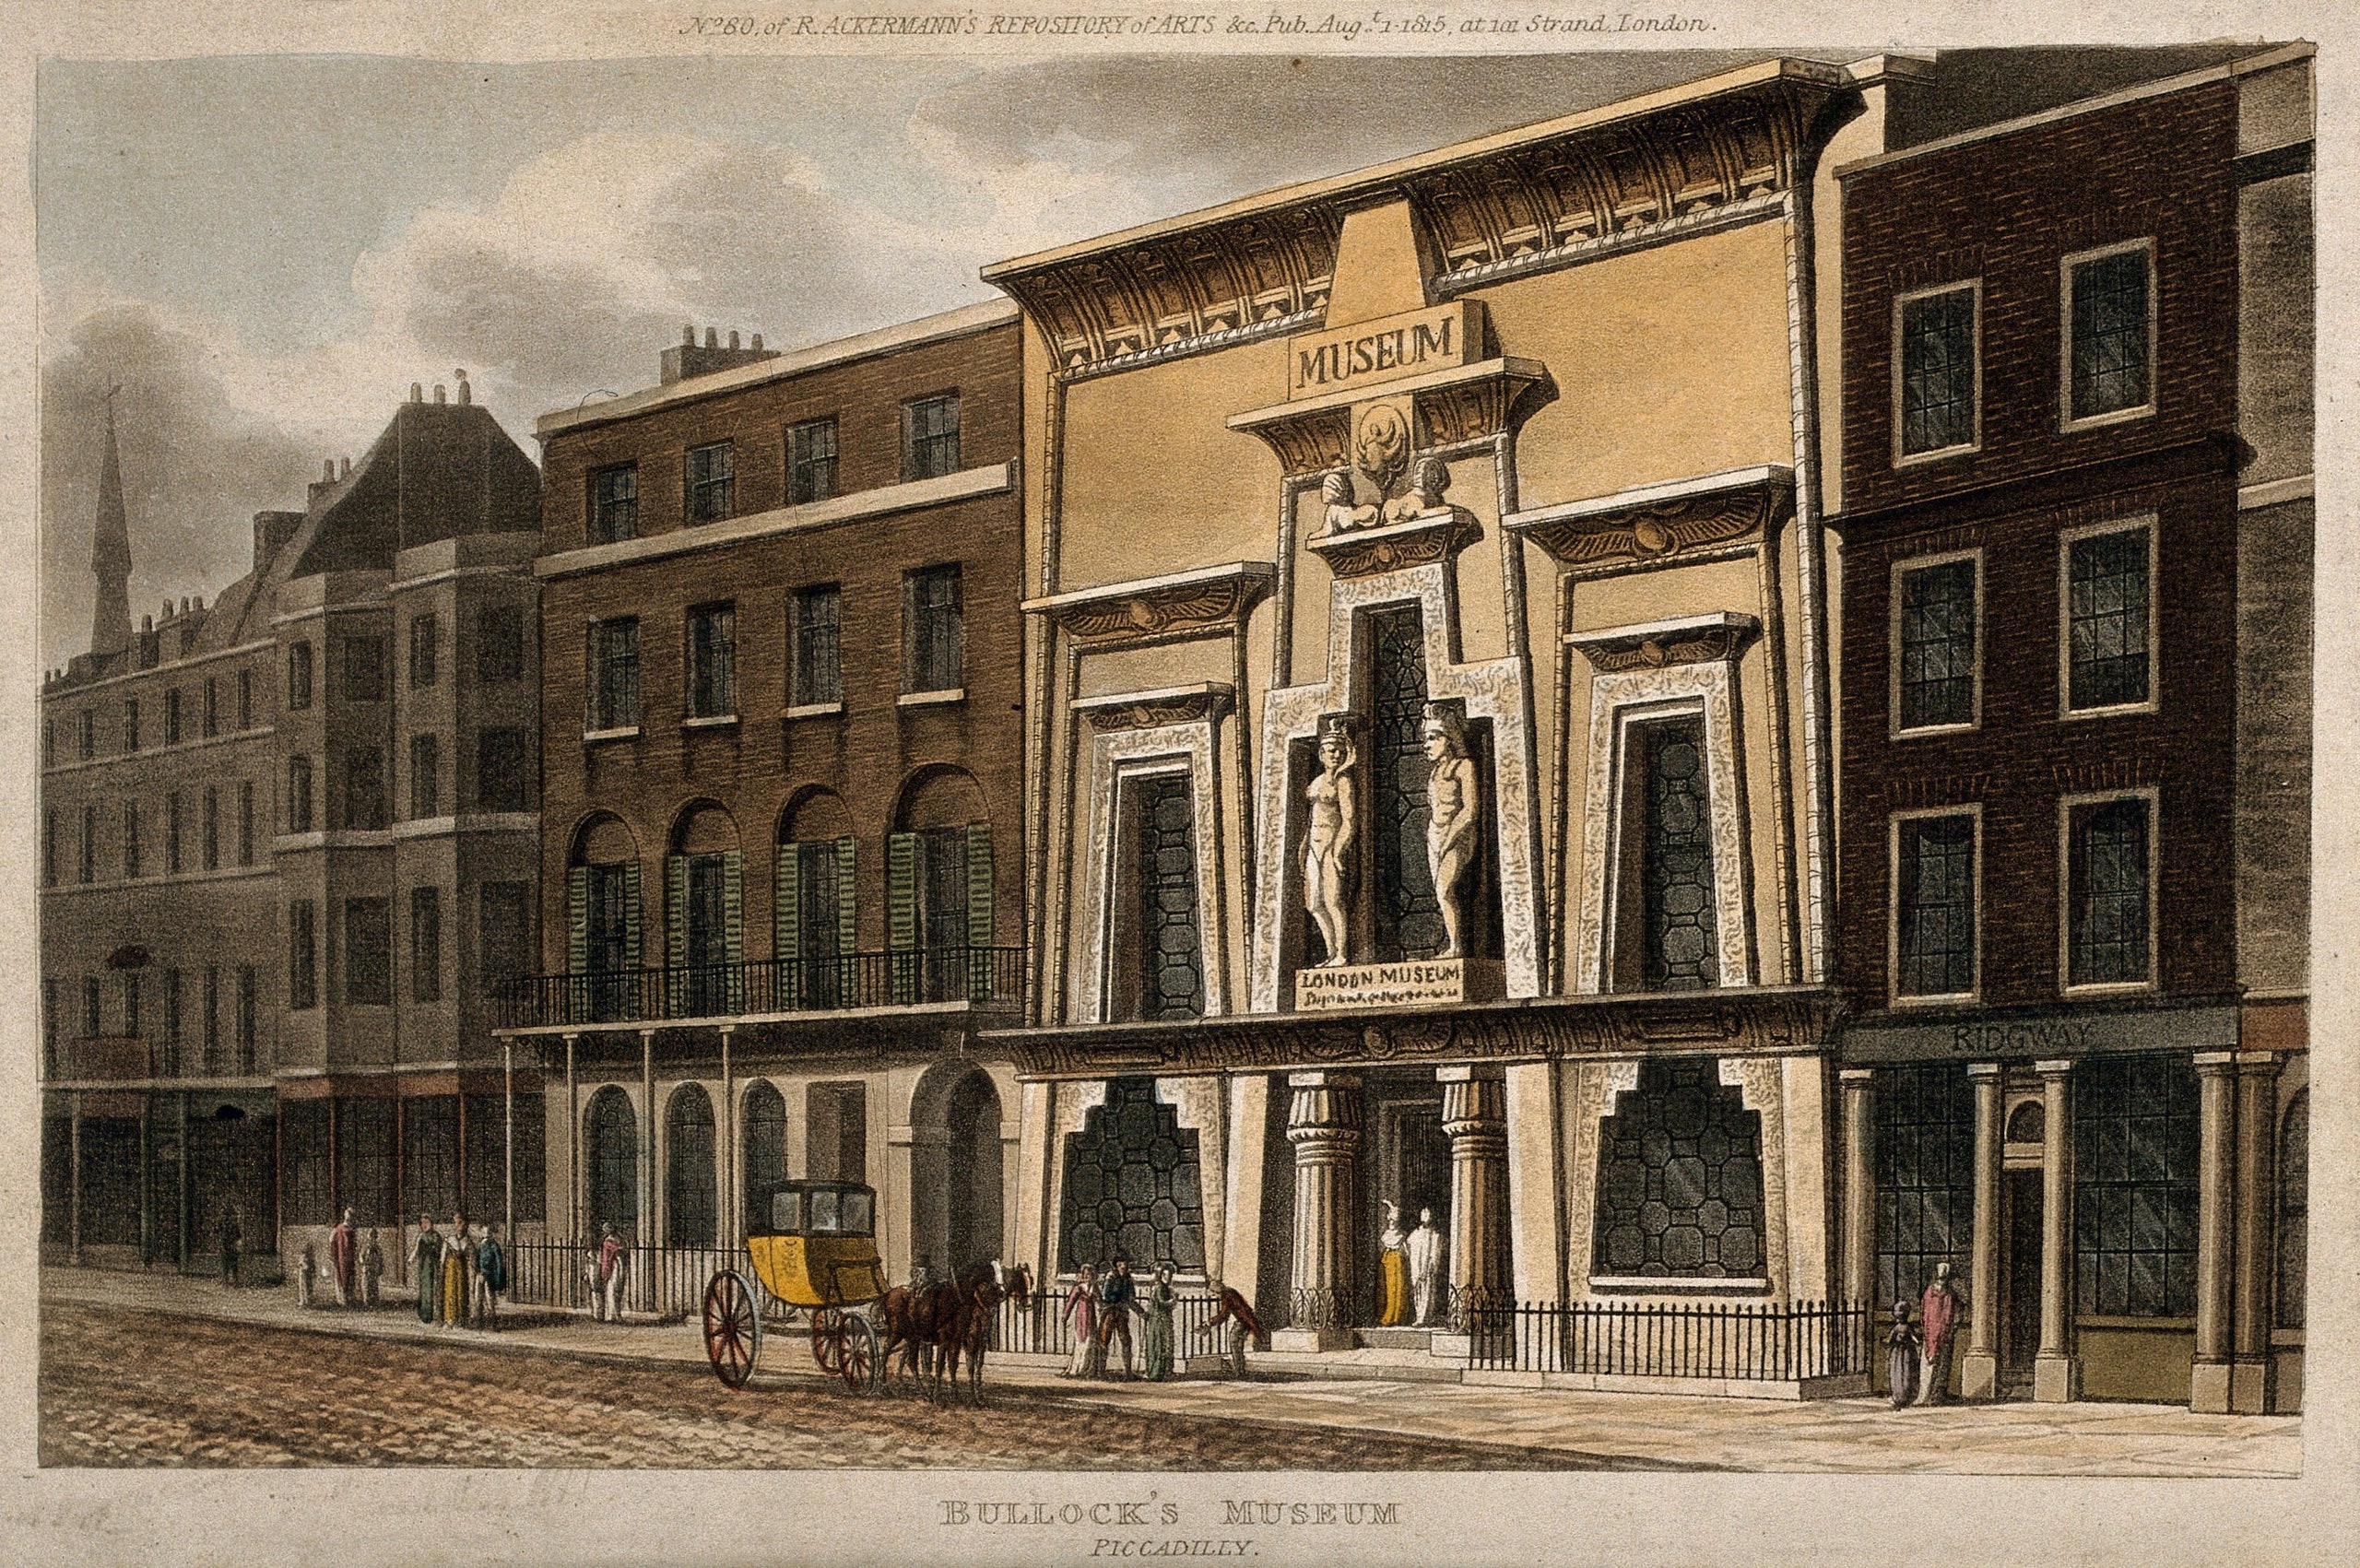 Bullocks Museum  Piccadilly. Coloured aquatint attributed to T. H. Shepherd 1815. Courtesy the Wellcome Collection